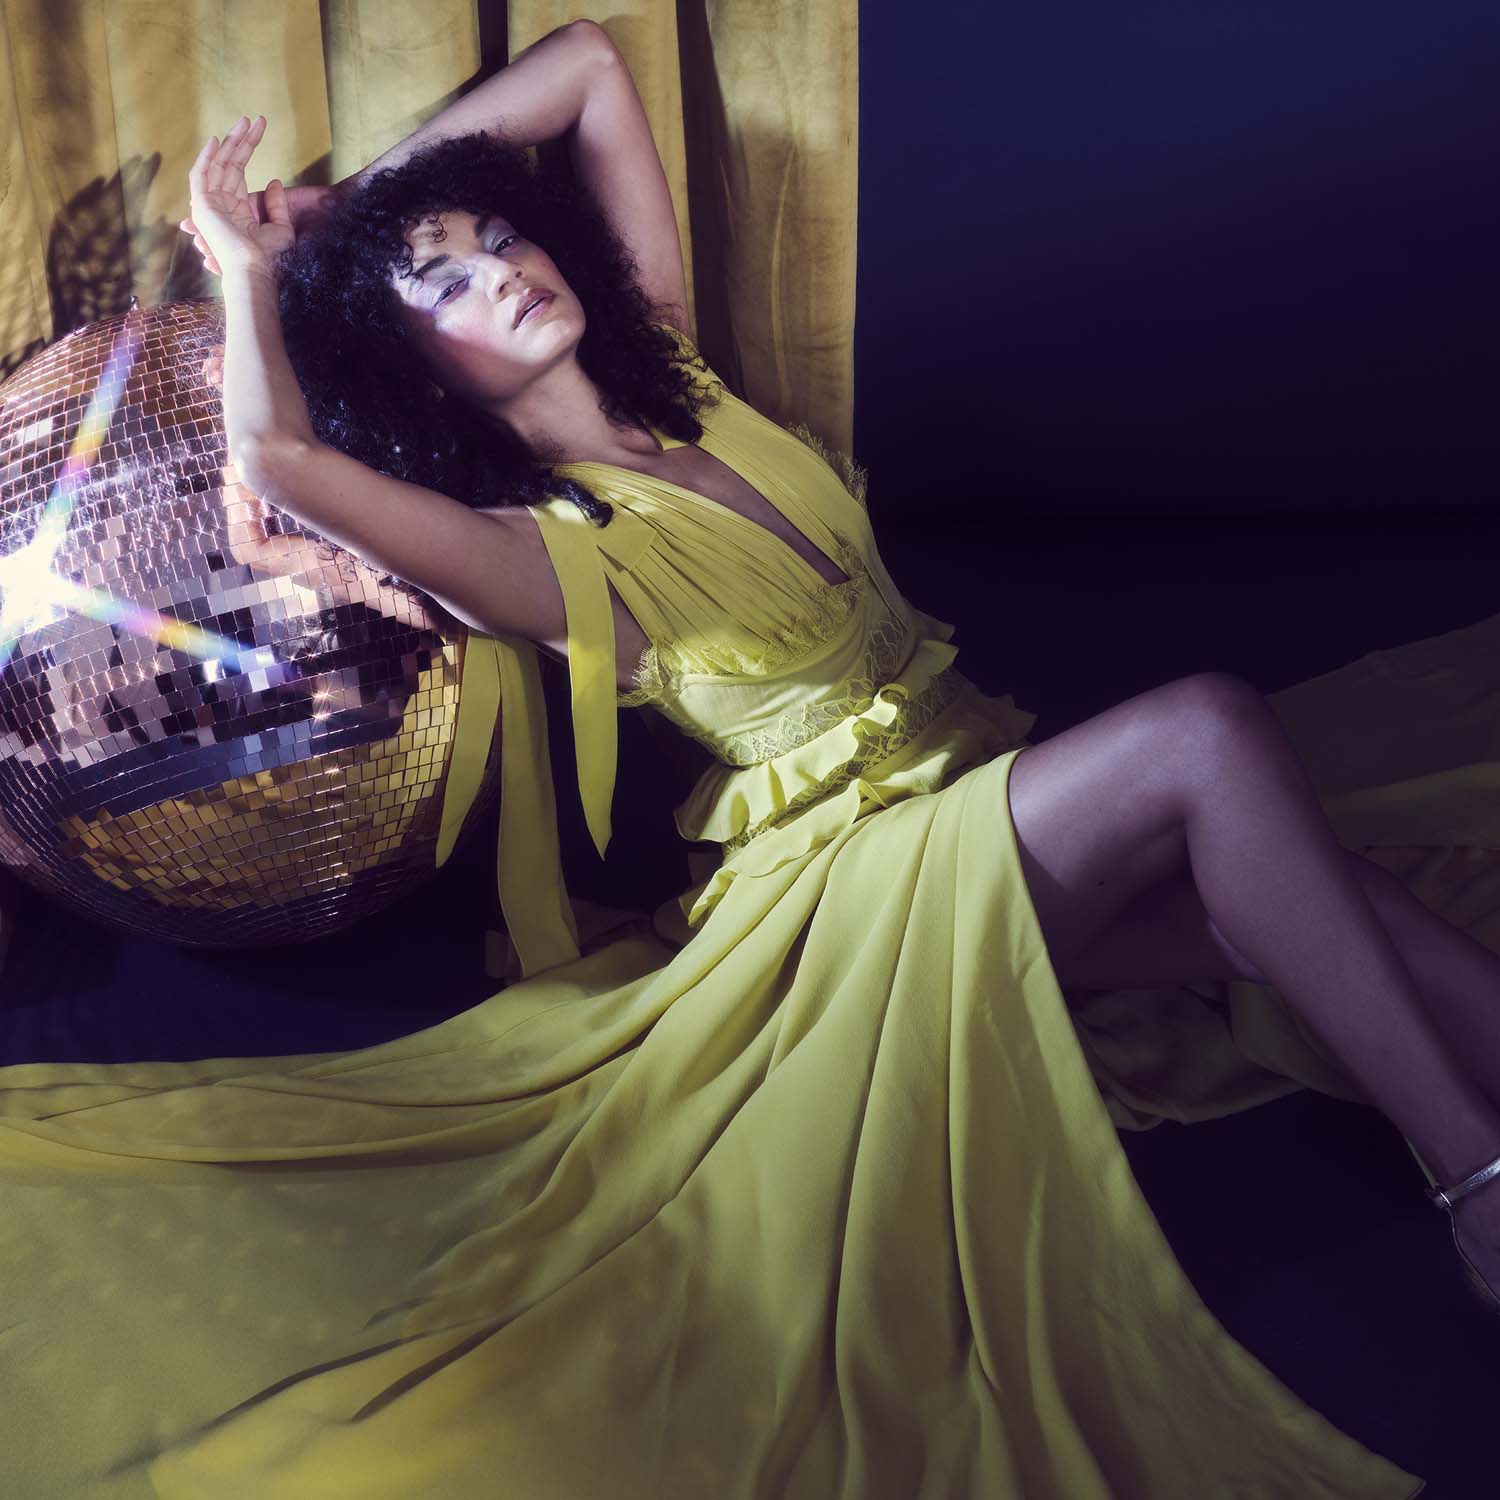 Model with dark, curly hair in flowing, yellow dress leaning against pink glitterball